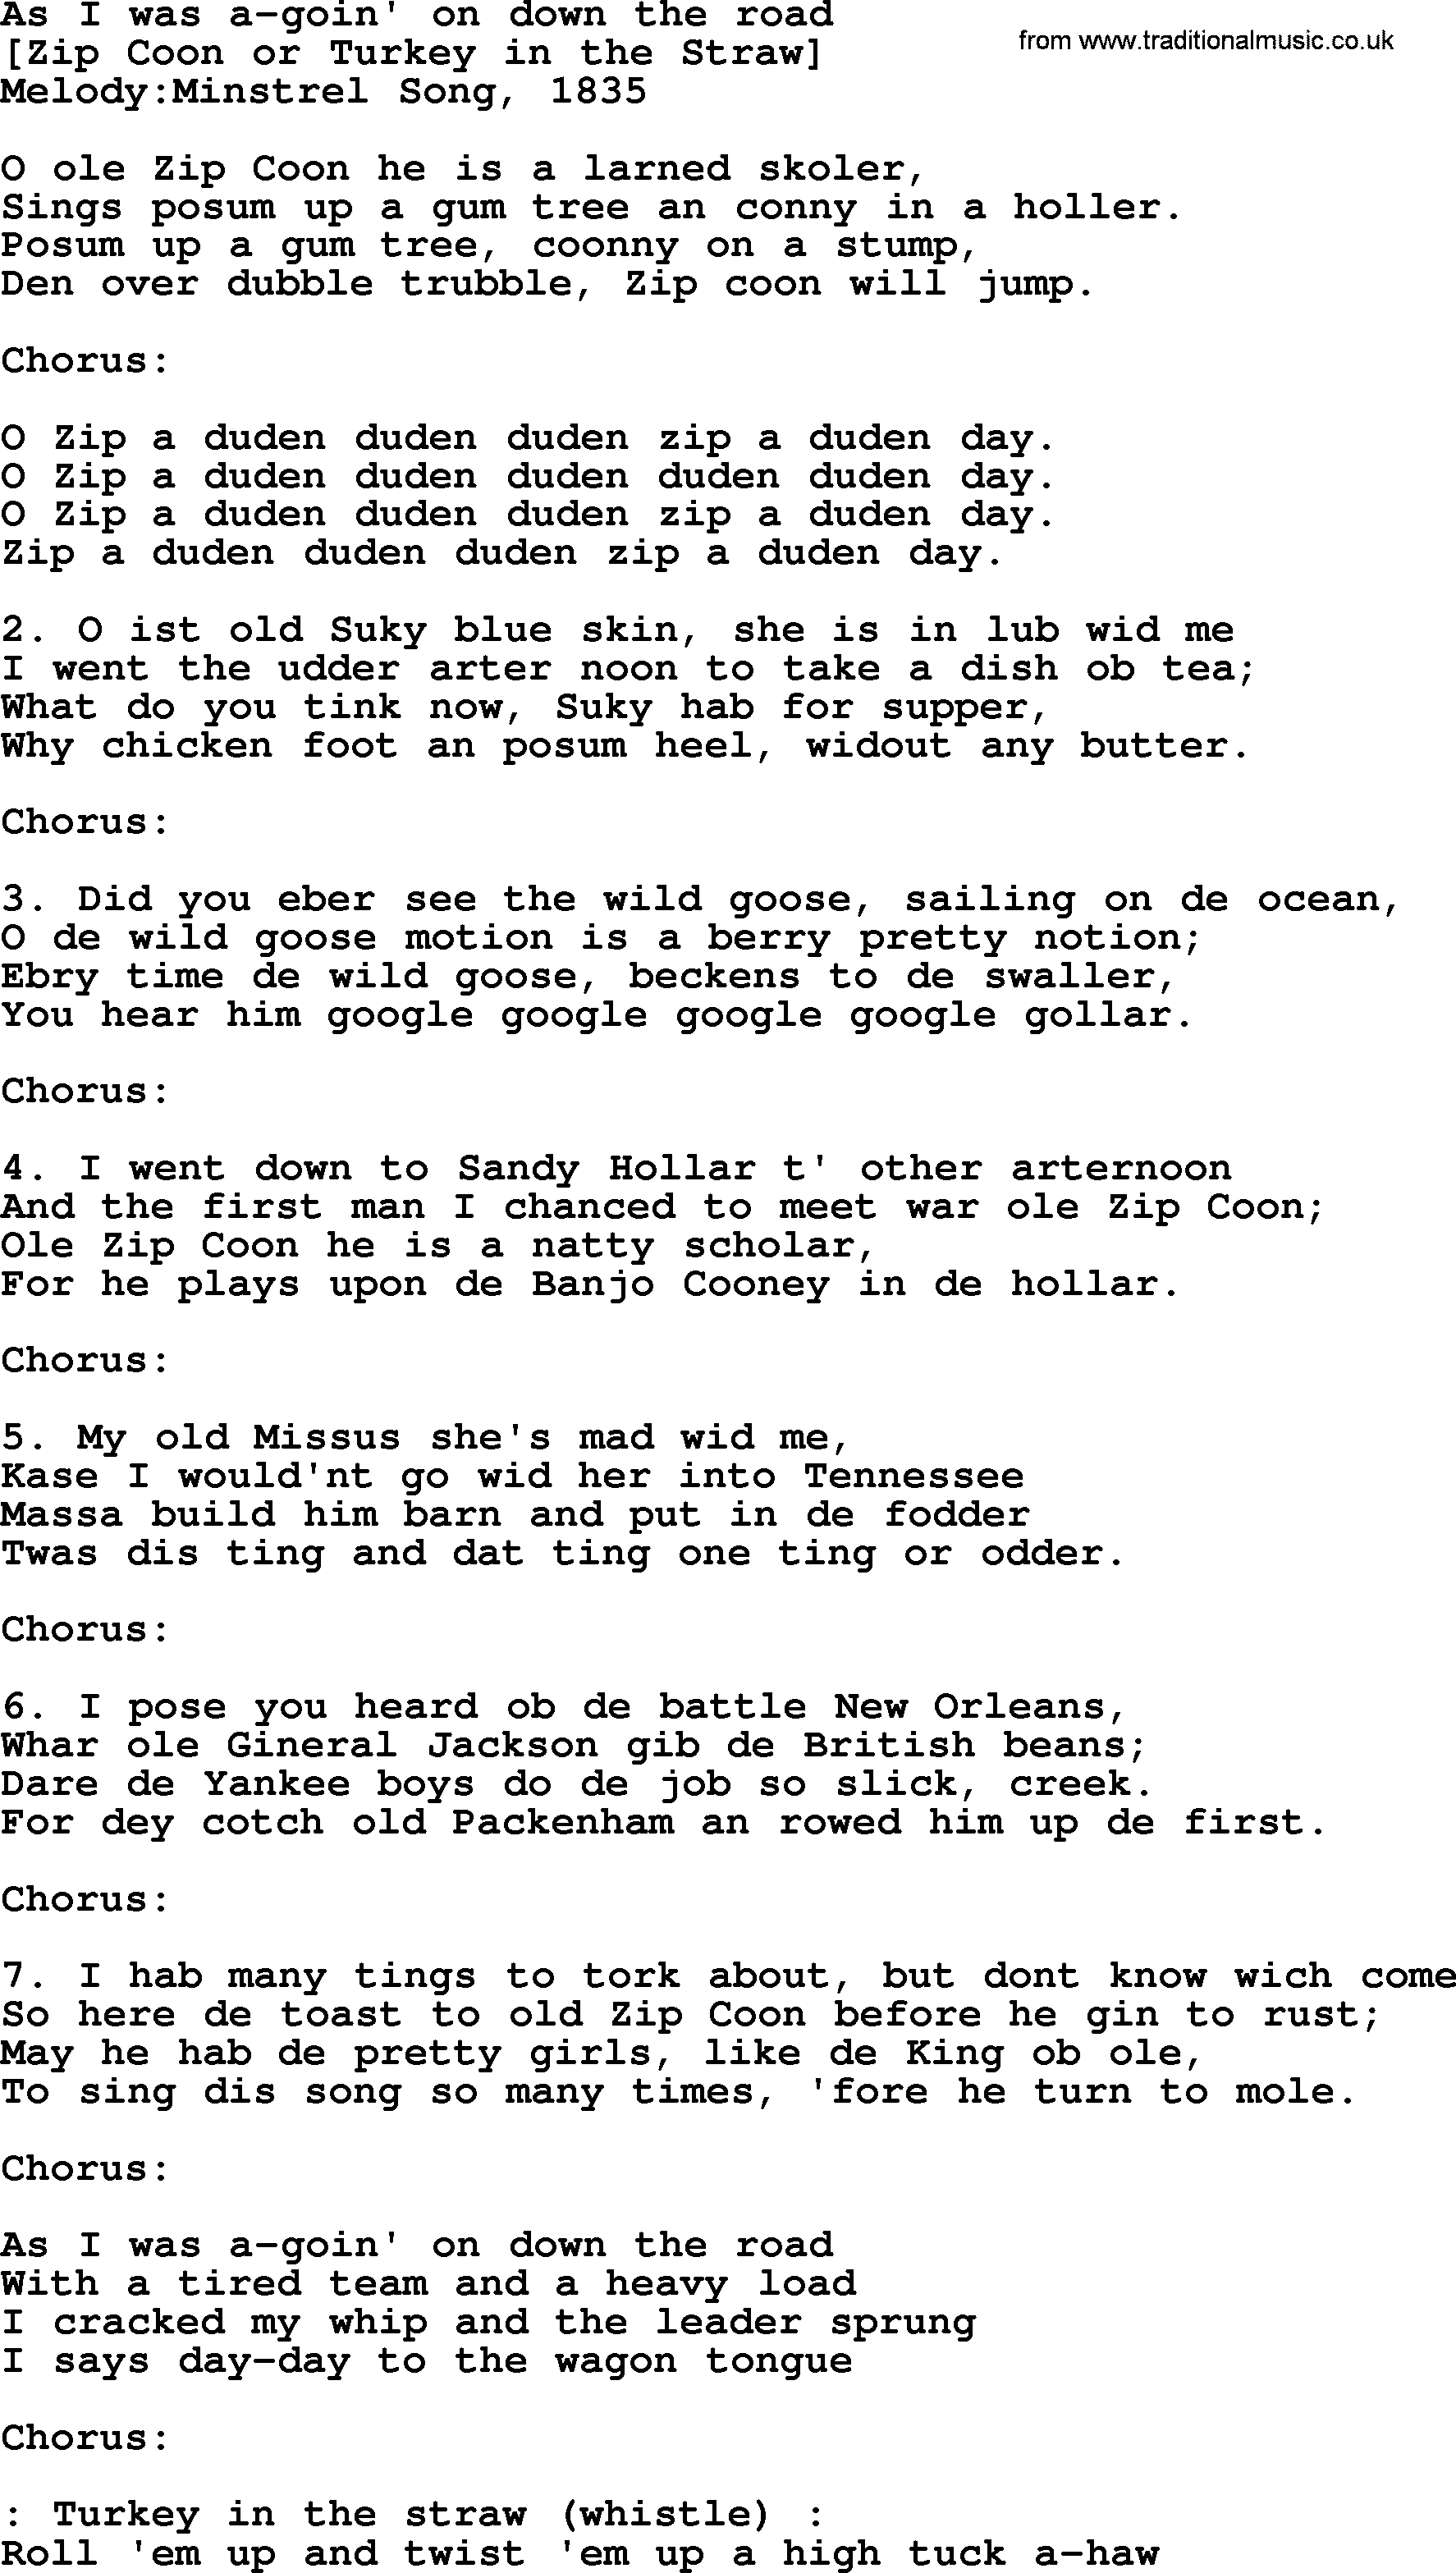 Old American Song: As I Was A-Goin' On Down The Road, lyrics